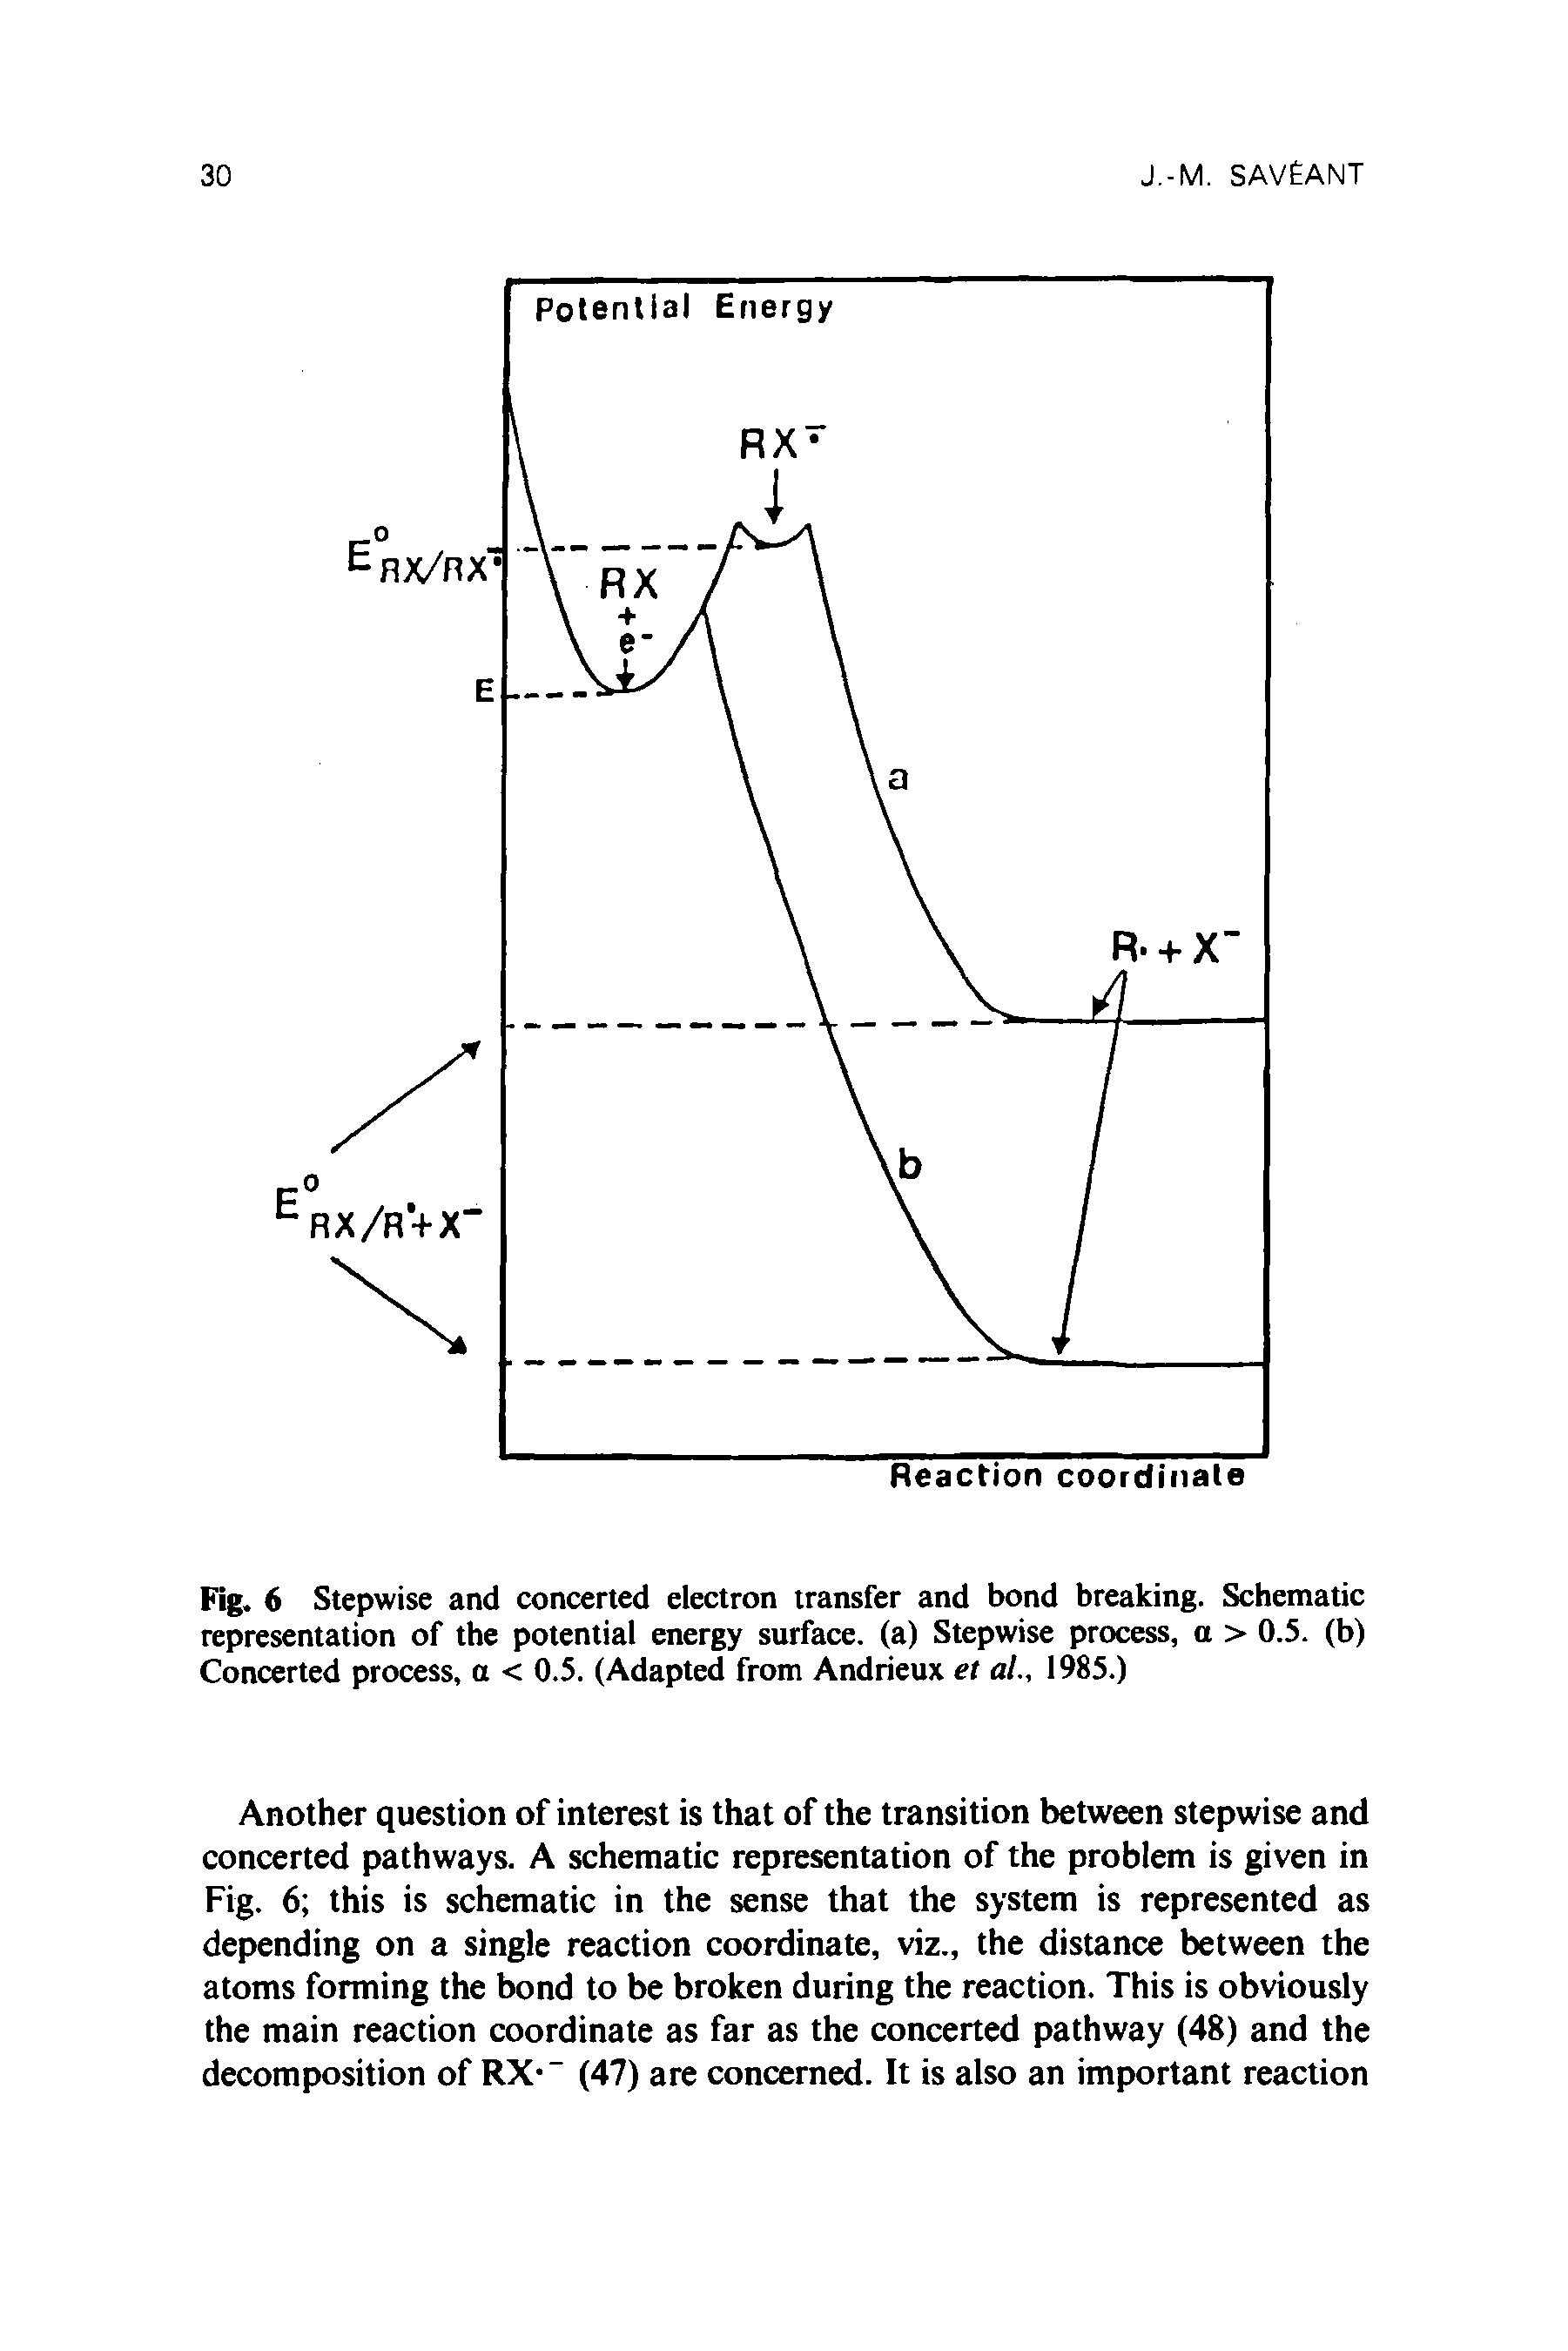 Fig. 6 Stepwise and concerted electron transfer and bond breaking. Schematic representation of the potential energy surface, (a) Stepwise process, a > 0.5. (b) Concerted process, a < 0.5. (Adapted from Andrieux et ai, 1985.)...